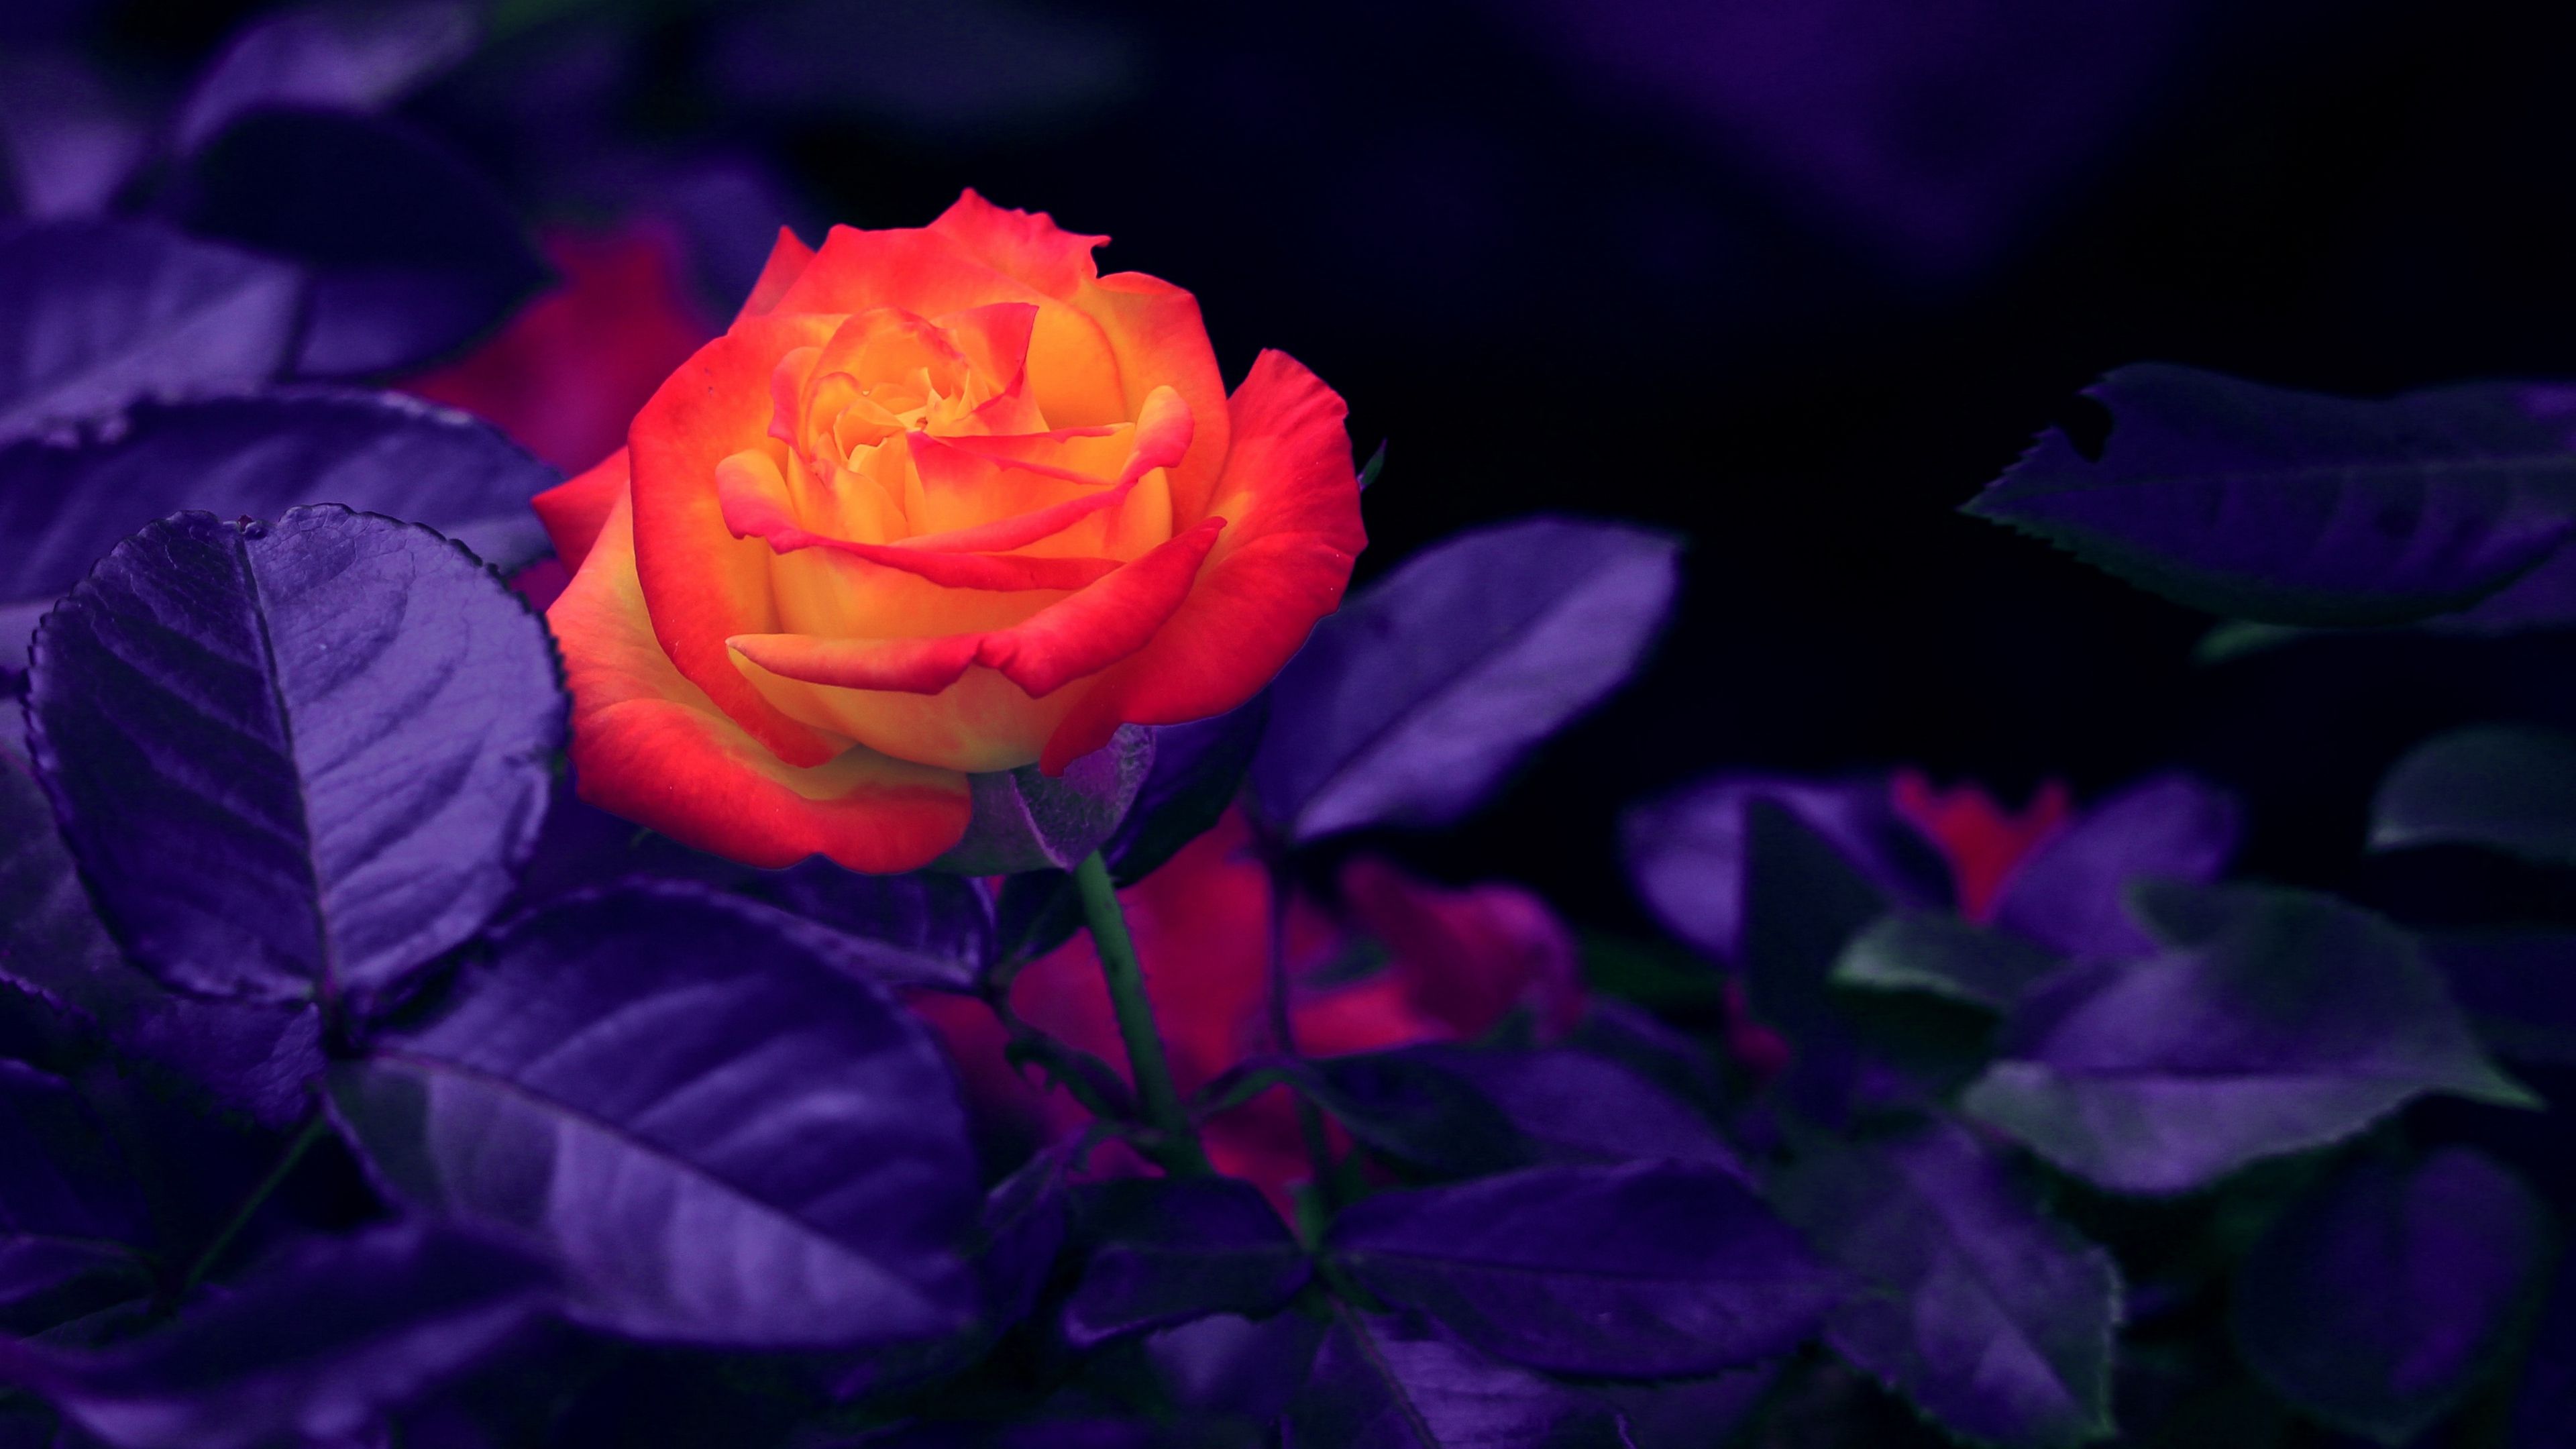 Rose 4K wallpaper for your desktop or mobile screen free and easy to download